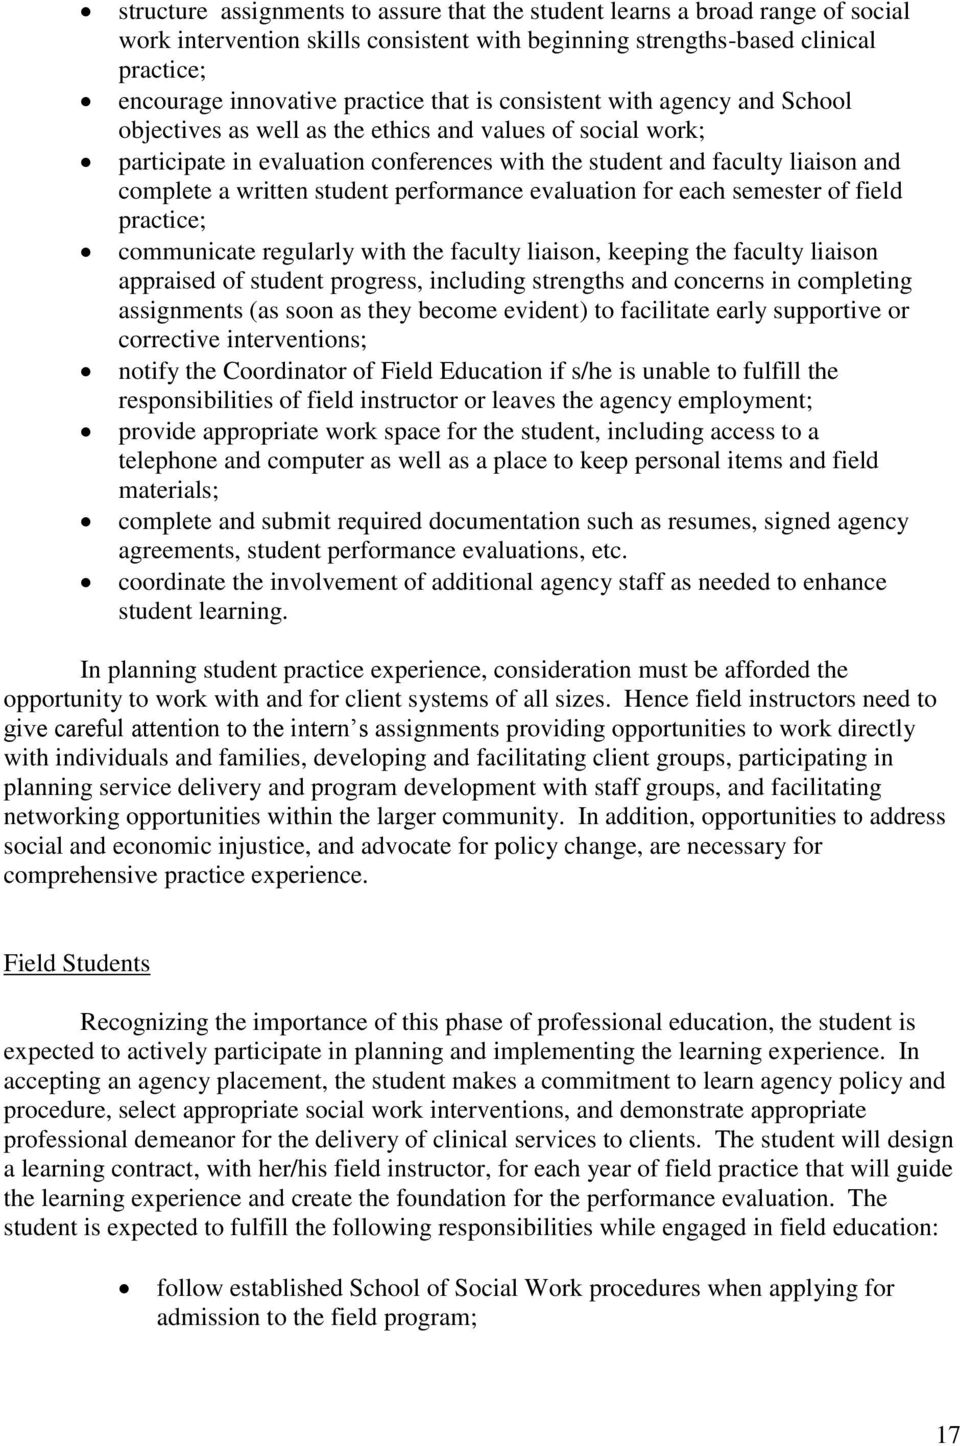 student performance evaluation for each semester of field practice; communicate regularly with the faculty liaison, keeping the faculty liaison appraised of student progress, including strengths and